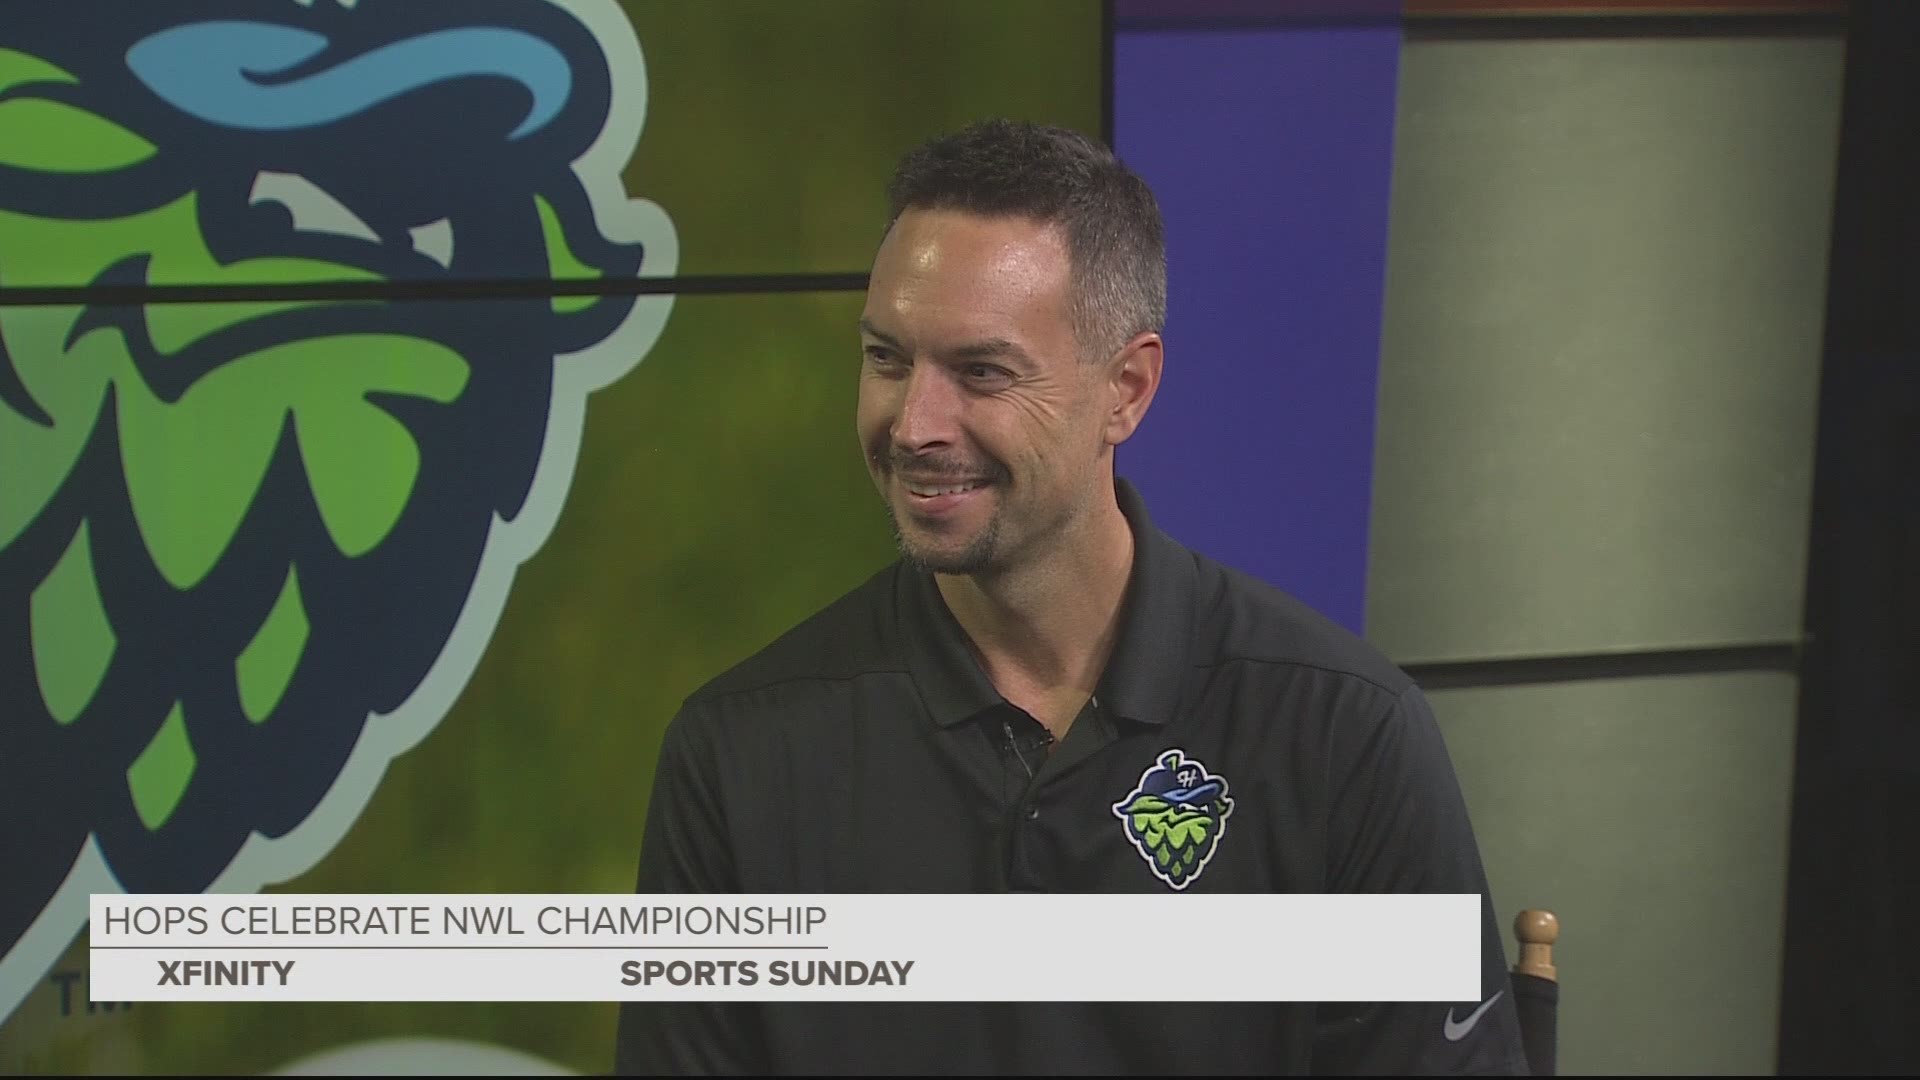 Hillsboro Hops general manager K.L. Wombacher joined Sports Sunday with Orlando Sanchez to discuss the team winning the 2019 NWL championship. The Hops have won three titles in seven seasons in Hillsboro.